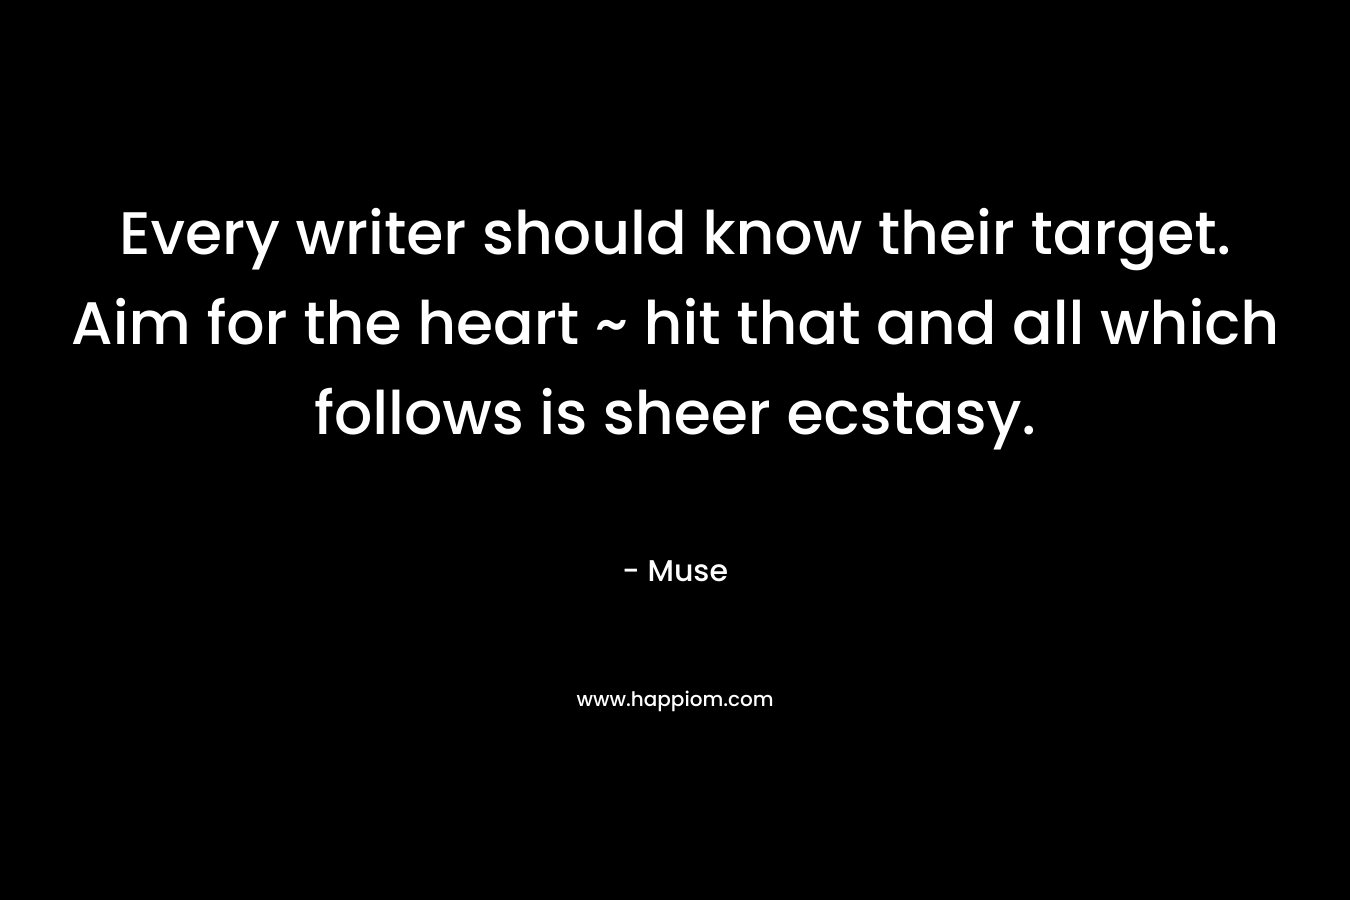 Every writer should know their target. Aim for the heart ~ hit that and all which follows is sheer ecstasy. – Muse